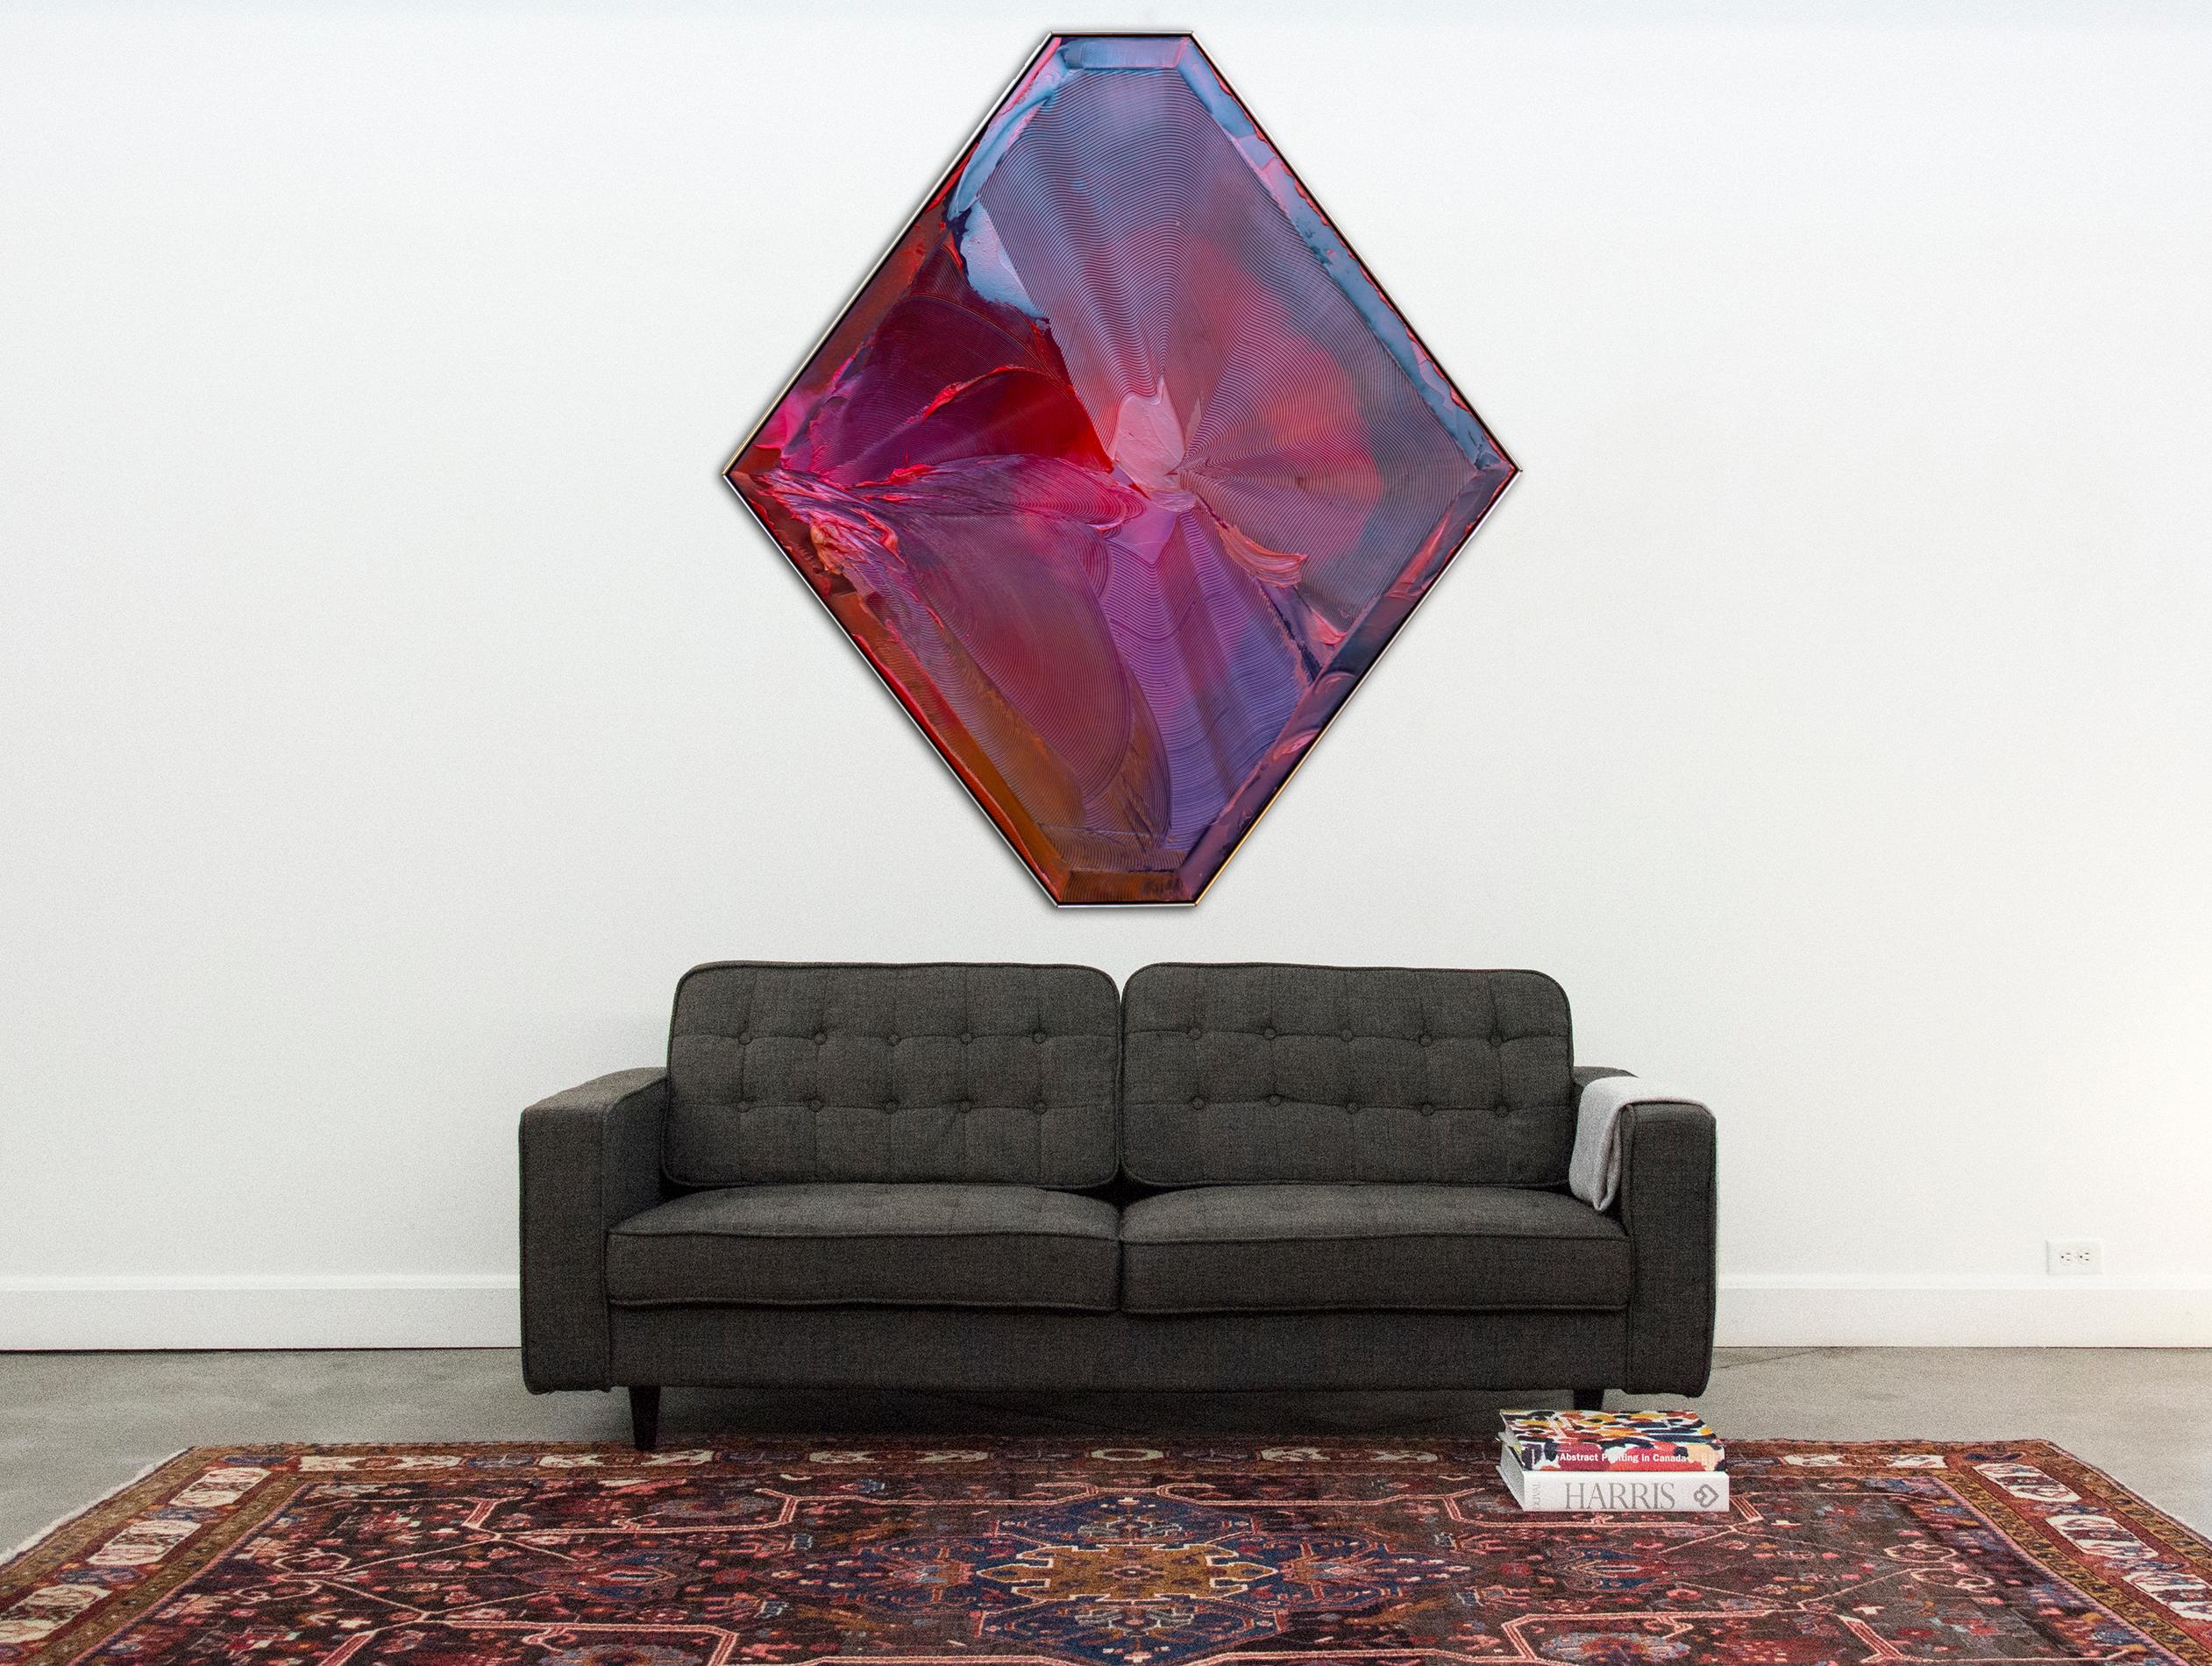 This fantastically psychedelic abstract painting by Joseph Drapell is created with acrylic paint and holographic additives. Wave-like textures ripple through the pink, purple, and blue diamond-oriented composition and are given substantial depth